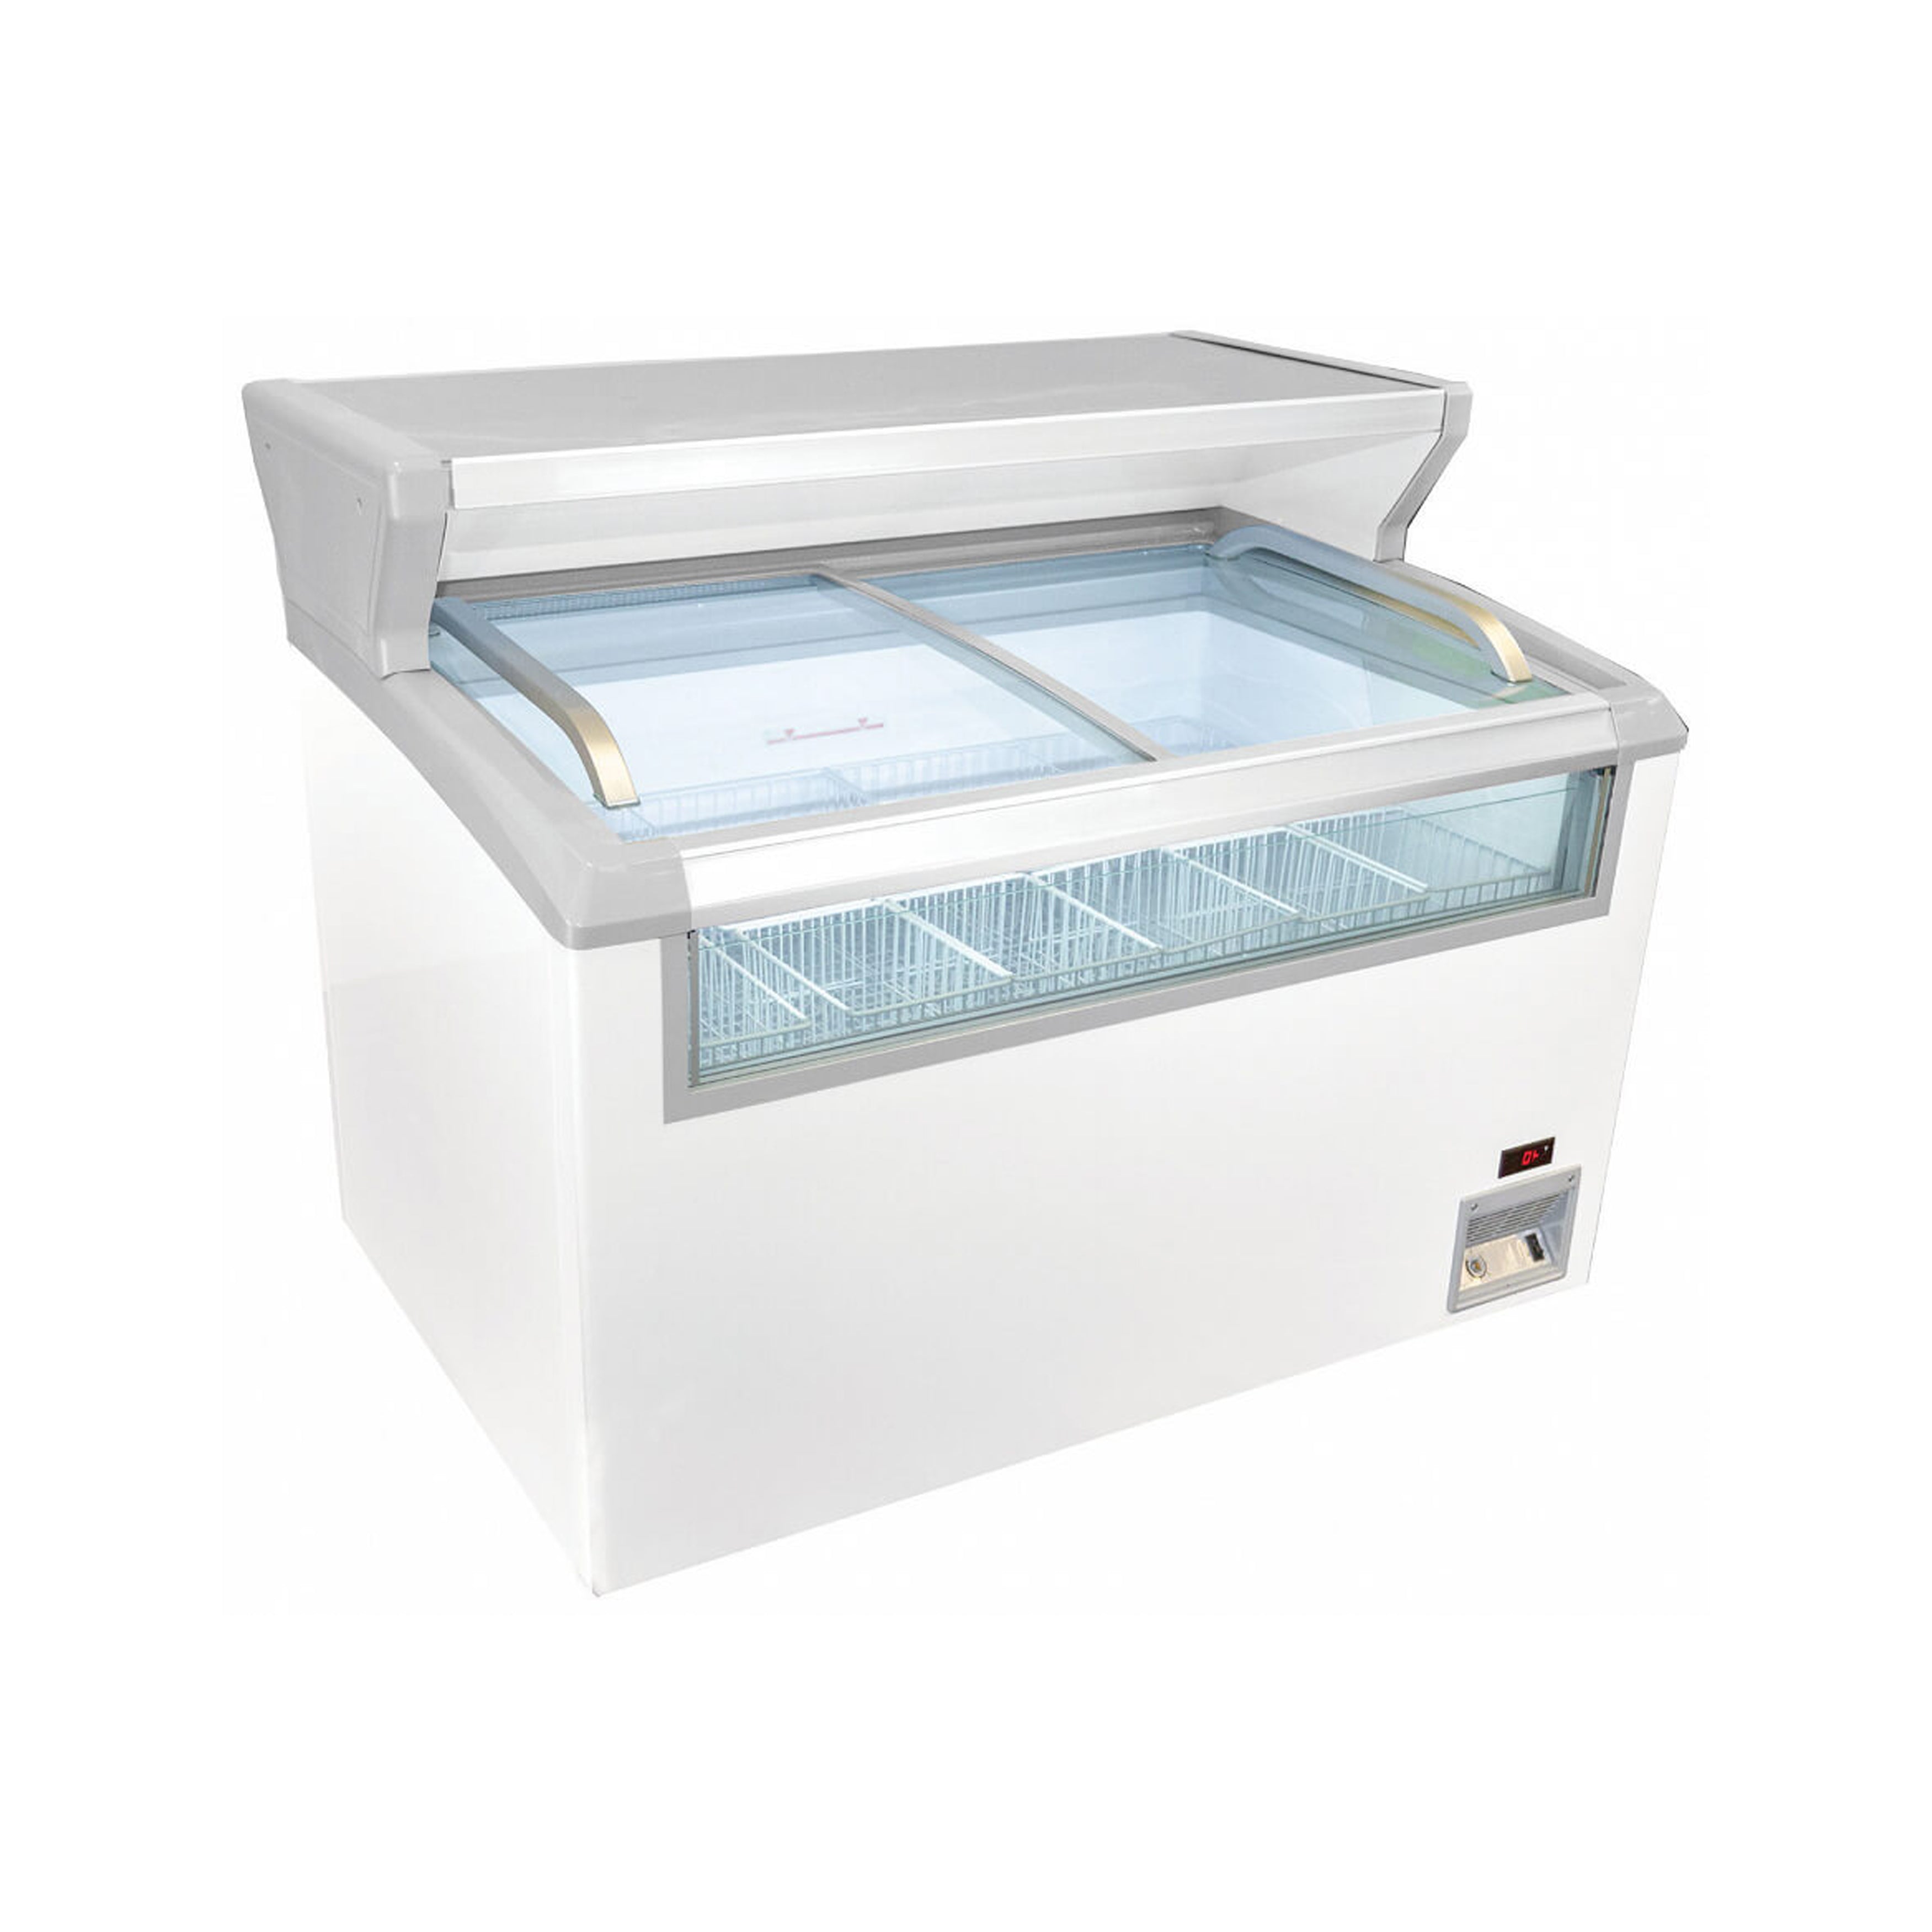 Excellence Industries - MCT-4HC, 49" Commercial Curved Top Display Freezer w/ Merchandising Shelf 13.2 cu. ft.